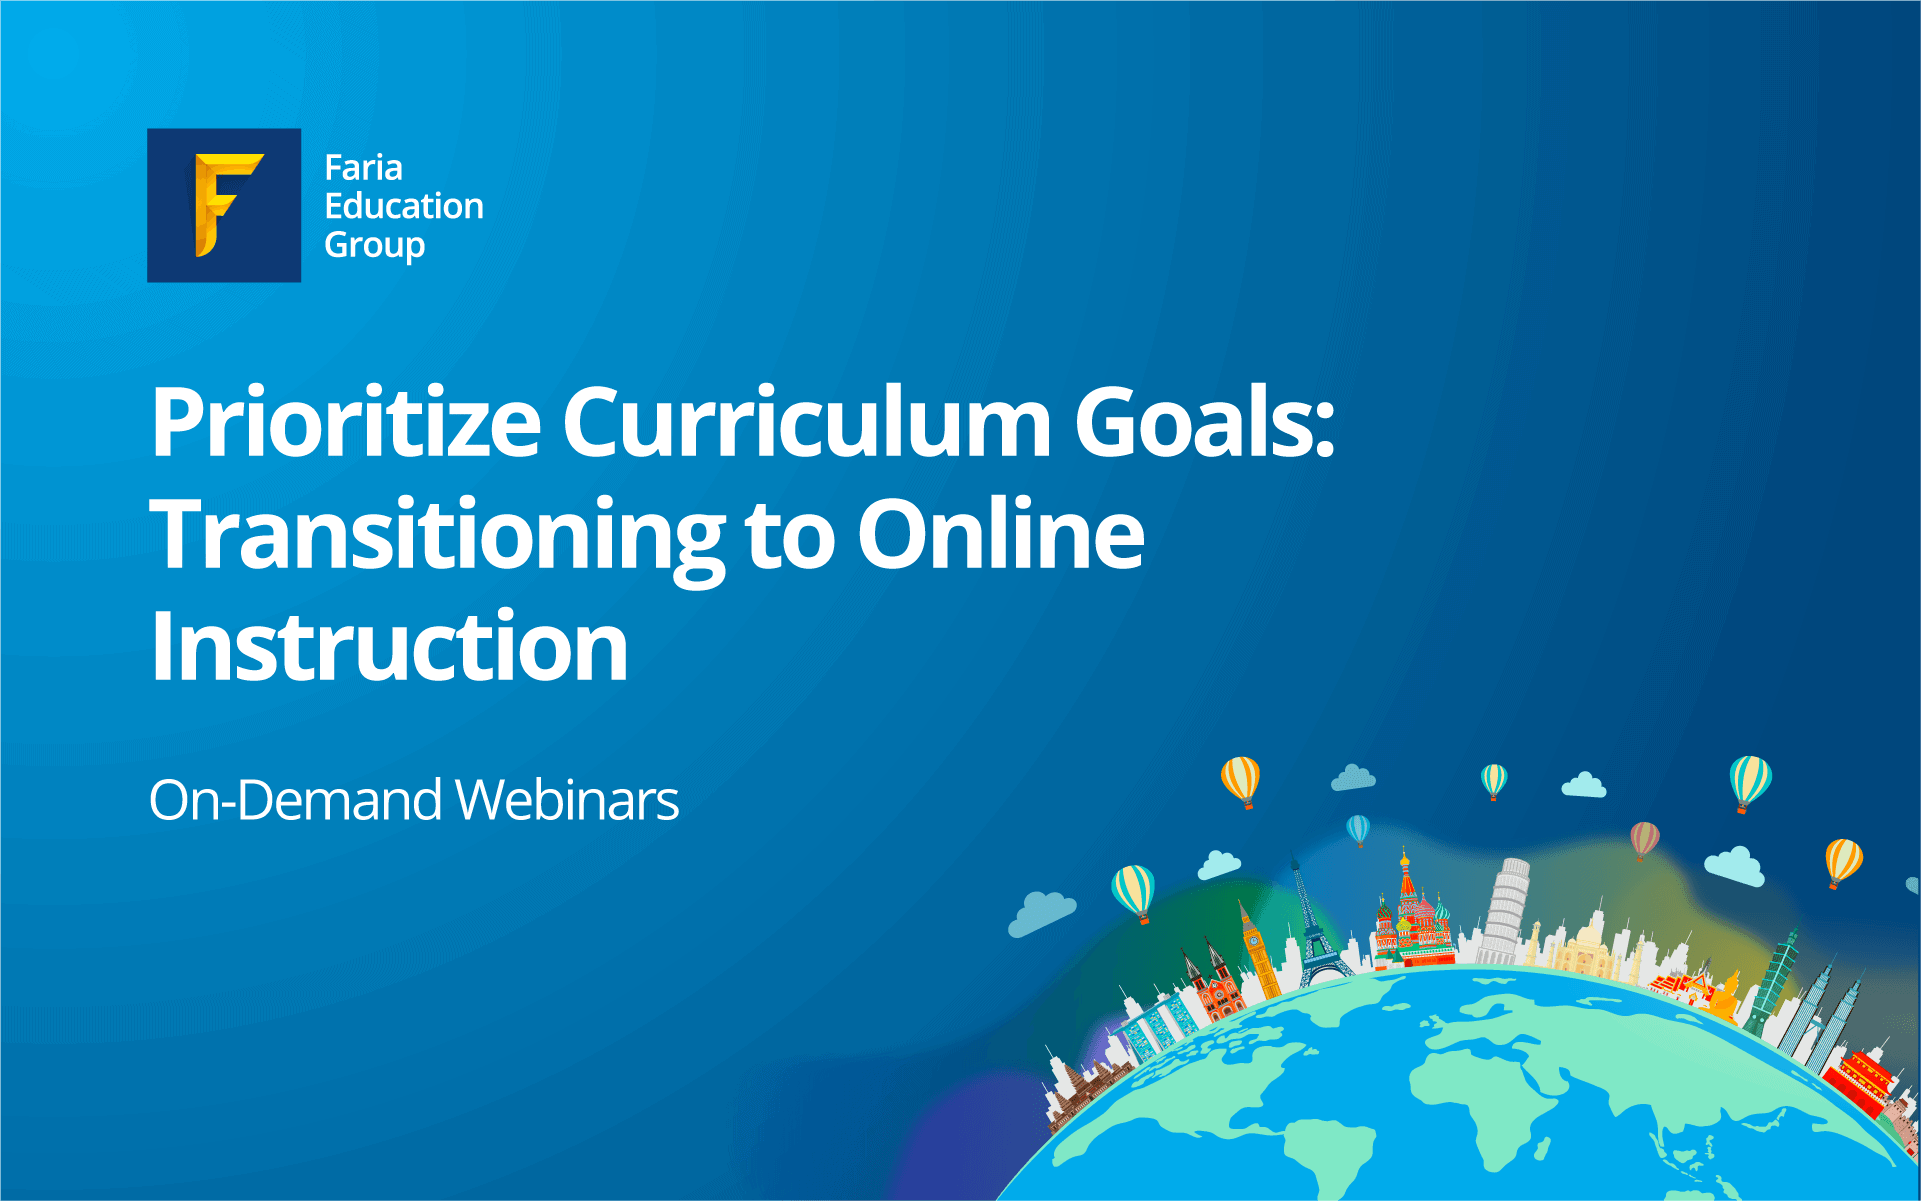 Prioritize Curriculum Goals: Transitioning to Online Instruction